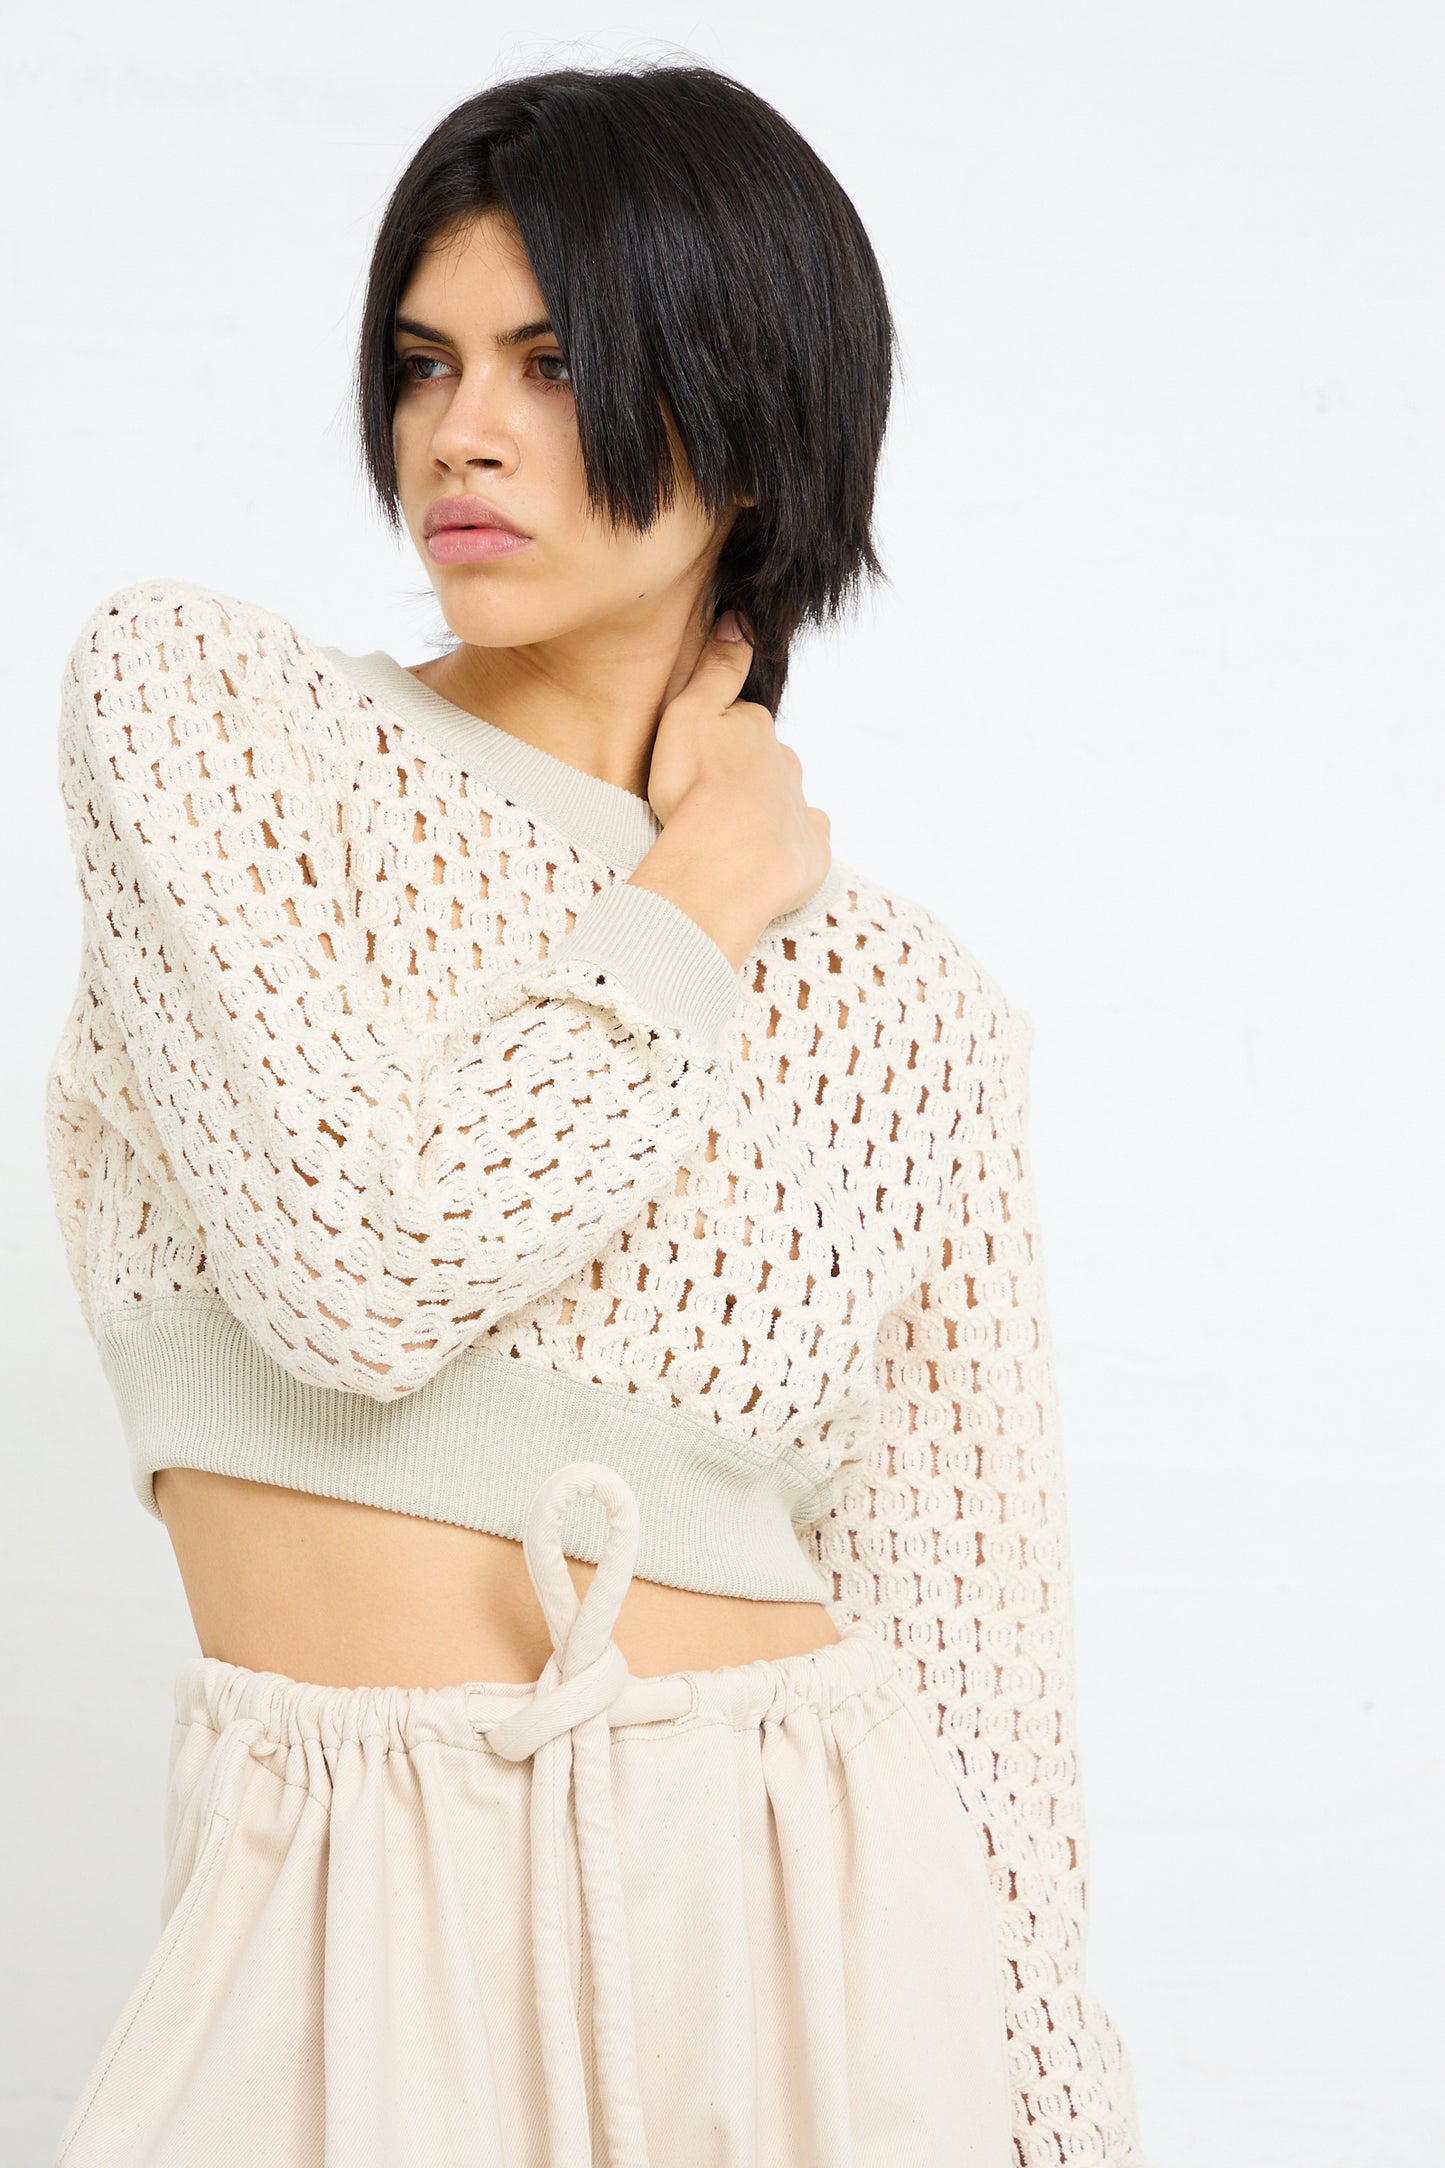 A woman with a short dark bob haircut wearing a Cotton Macro Mesh Cropped Sweater in Ivory by Veronique Leroy and pants, looking to the side with a thoughtful expression.